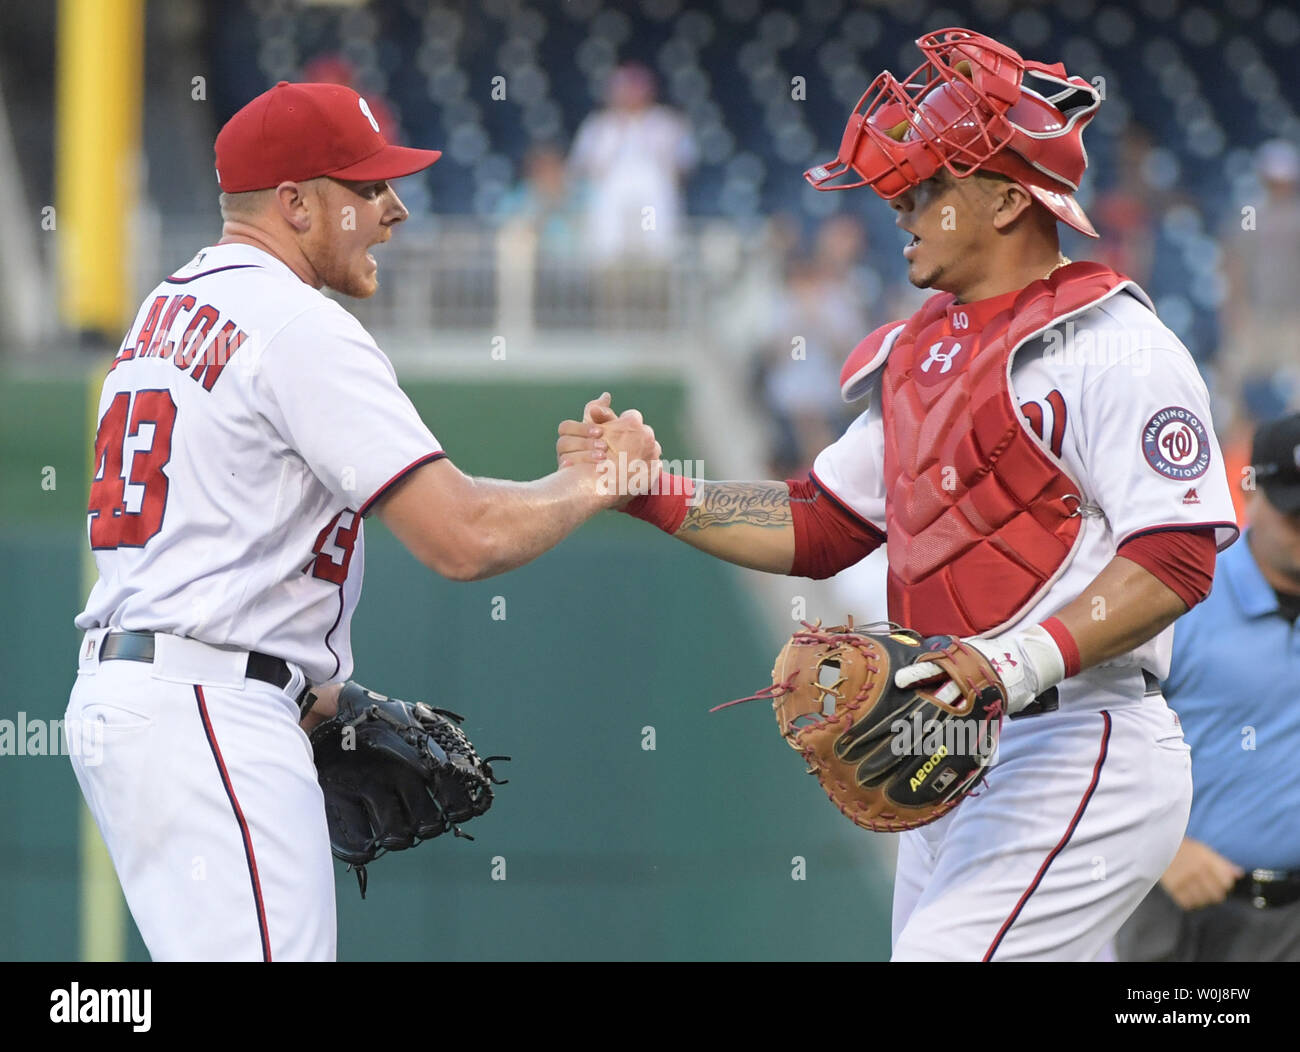 Washington Nationals Mark Melanin celebrates with Wilson Ramos after the Nationals defeated the Mets 1-0 at Nationals Park in Washington, D.C. on September 14, 2106. Photo by Kevin Dietsch/UPI Stock Photo